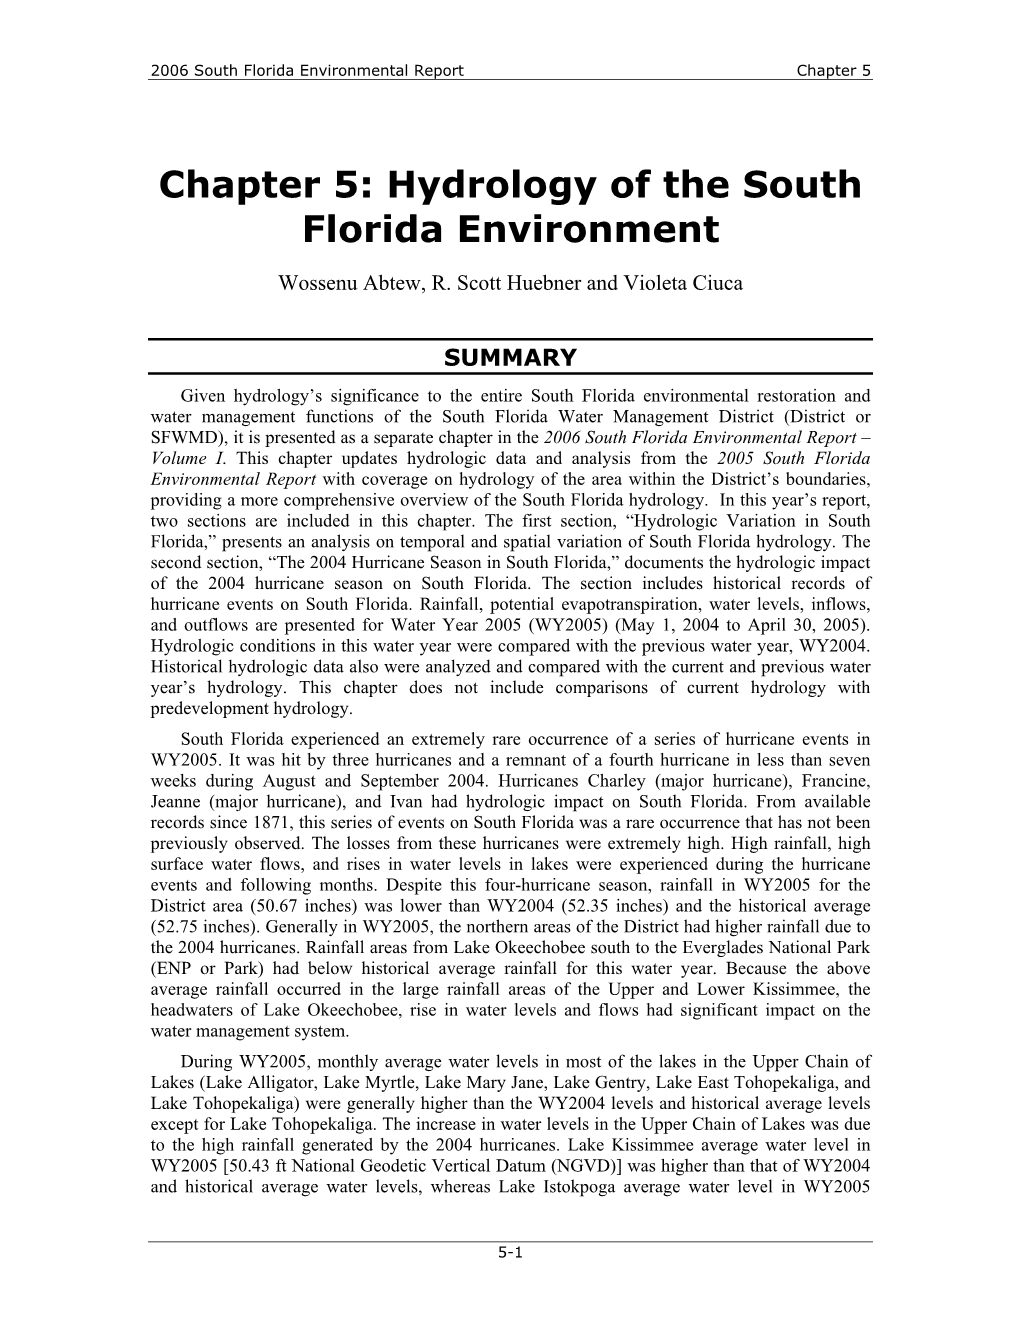 Chapter 5: Hydrology of the South Florida Environment